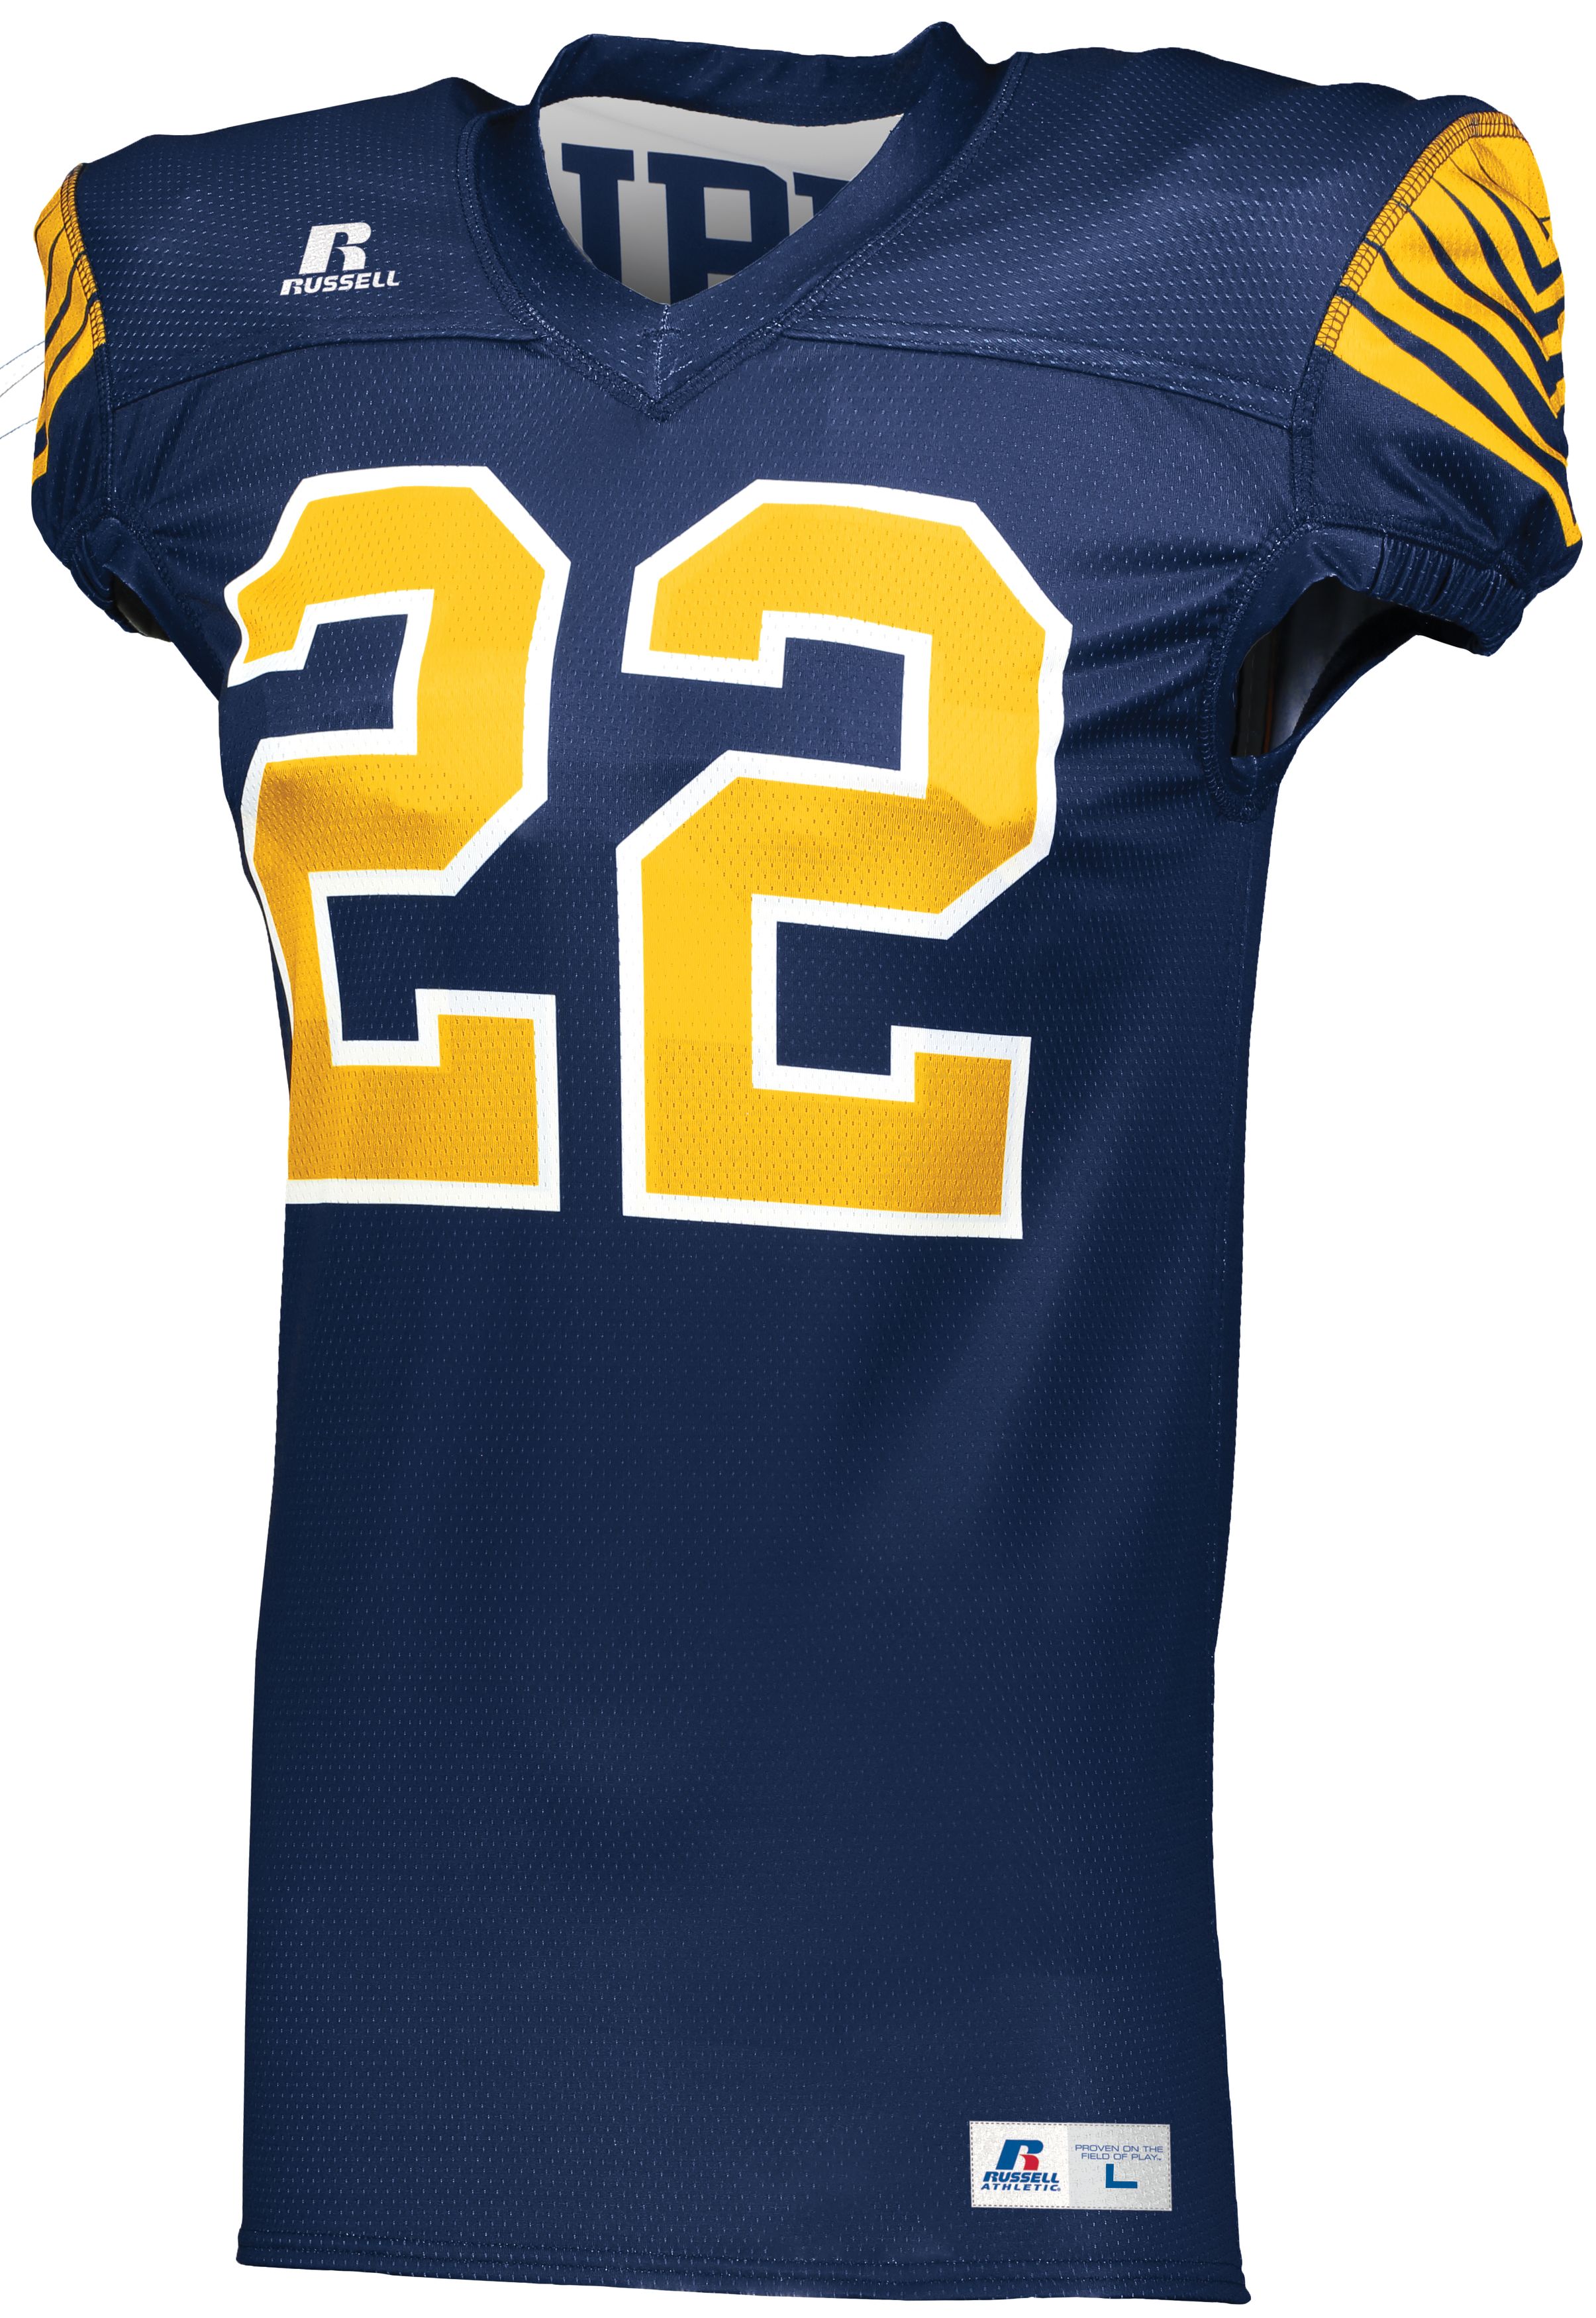 Russell CUT_R08BNU  Youth FreeStyle Sublimated Reversible Football Jersey